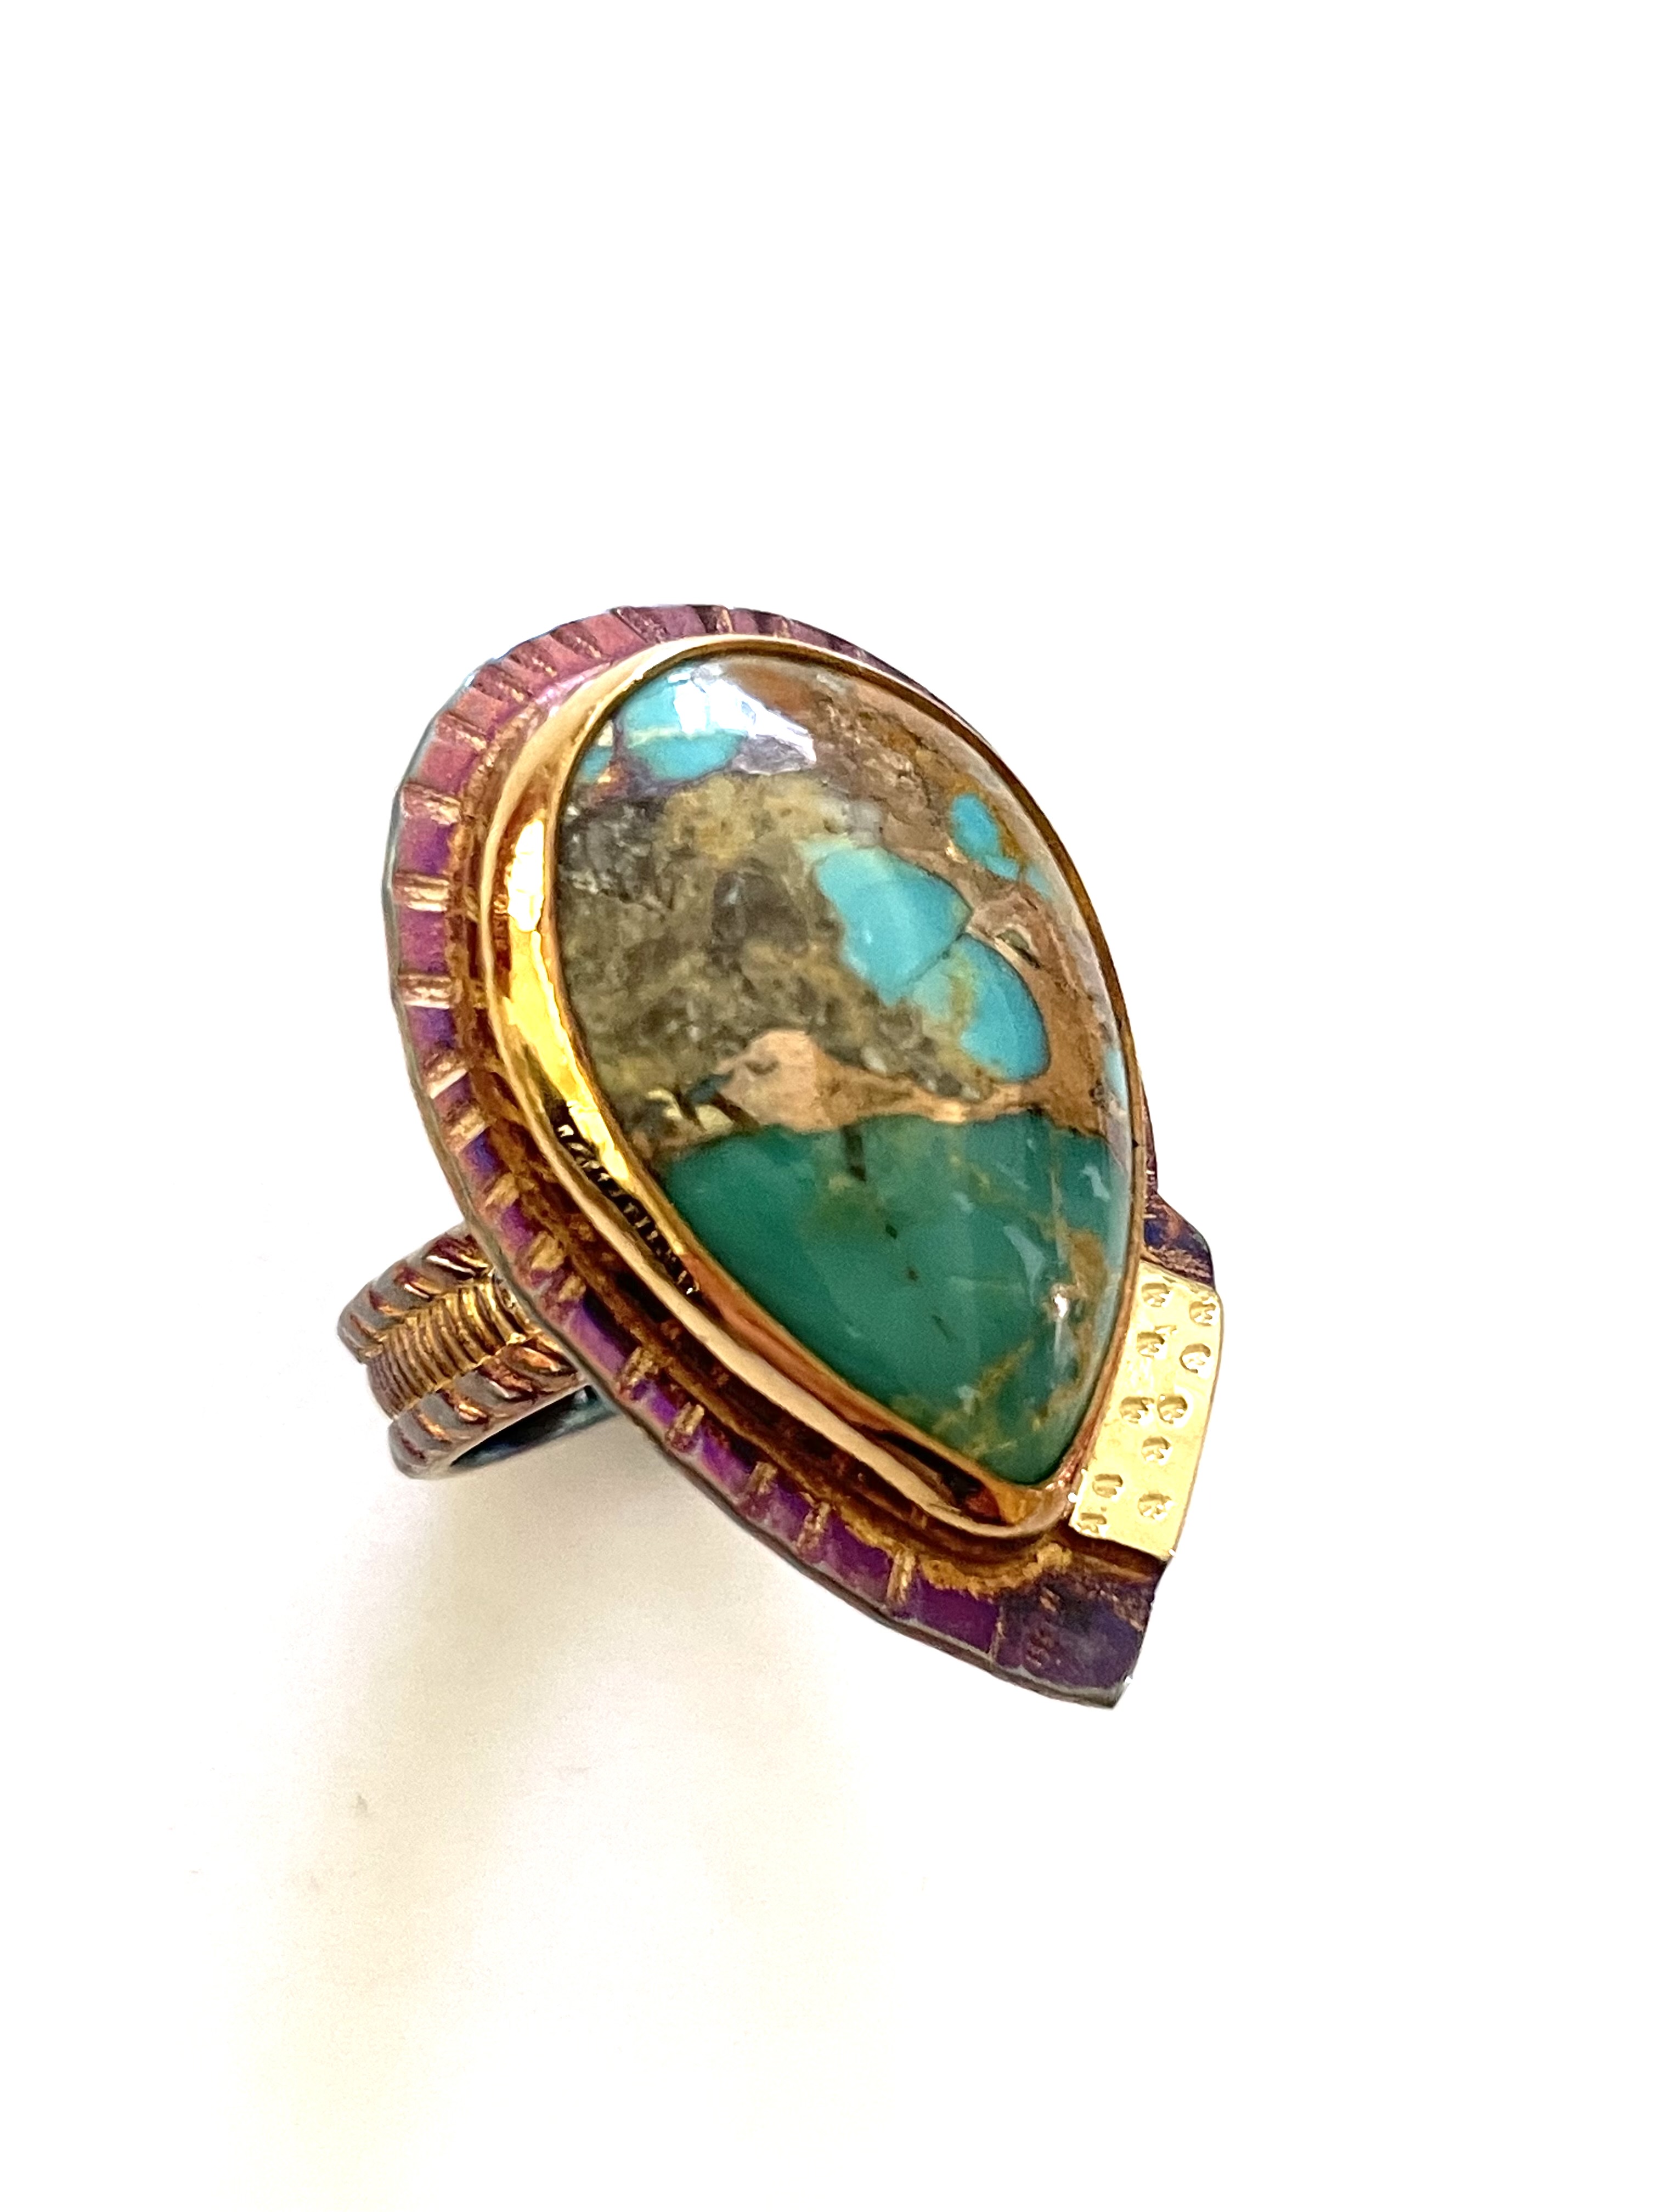 Sterling Silver, Fine Silver Bezel, Mosaic Turquoise, 18k Ring Size 7.